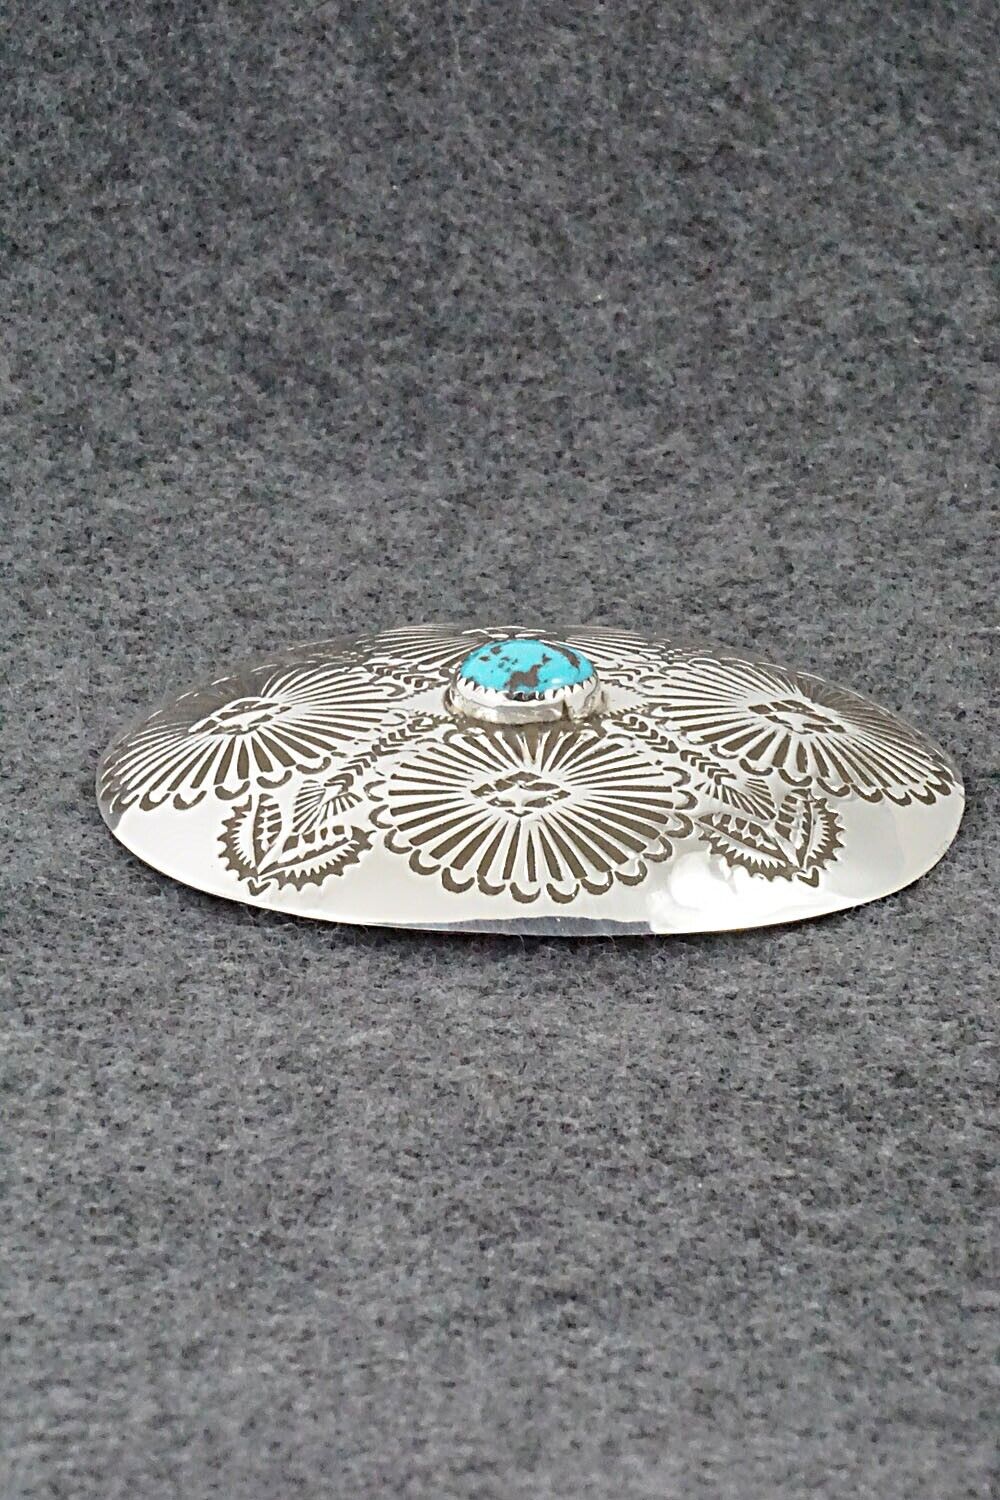 Turquoise & Sterling Silver Belt Buckle - Shirley Silver